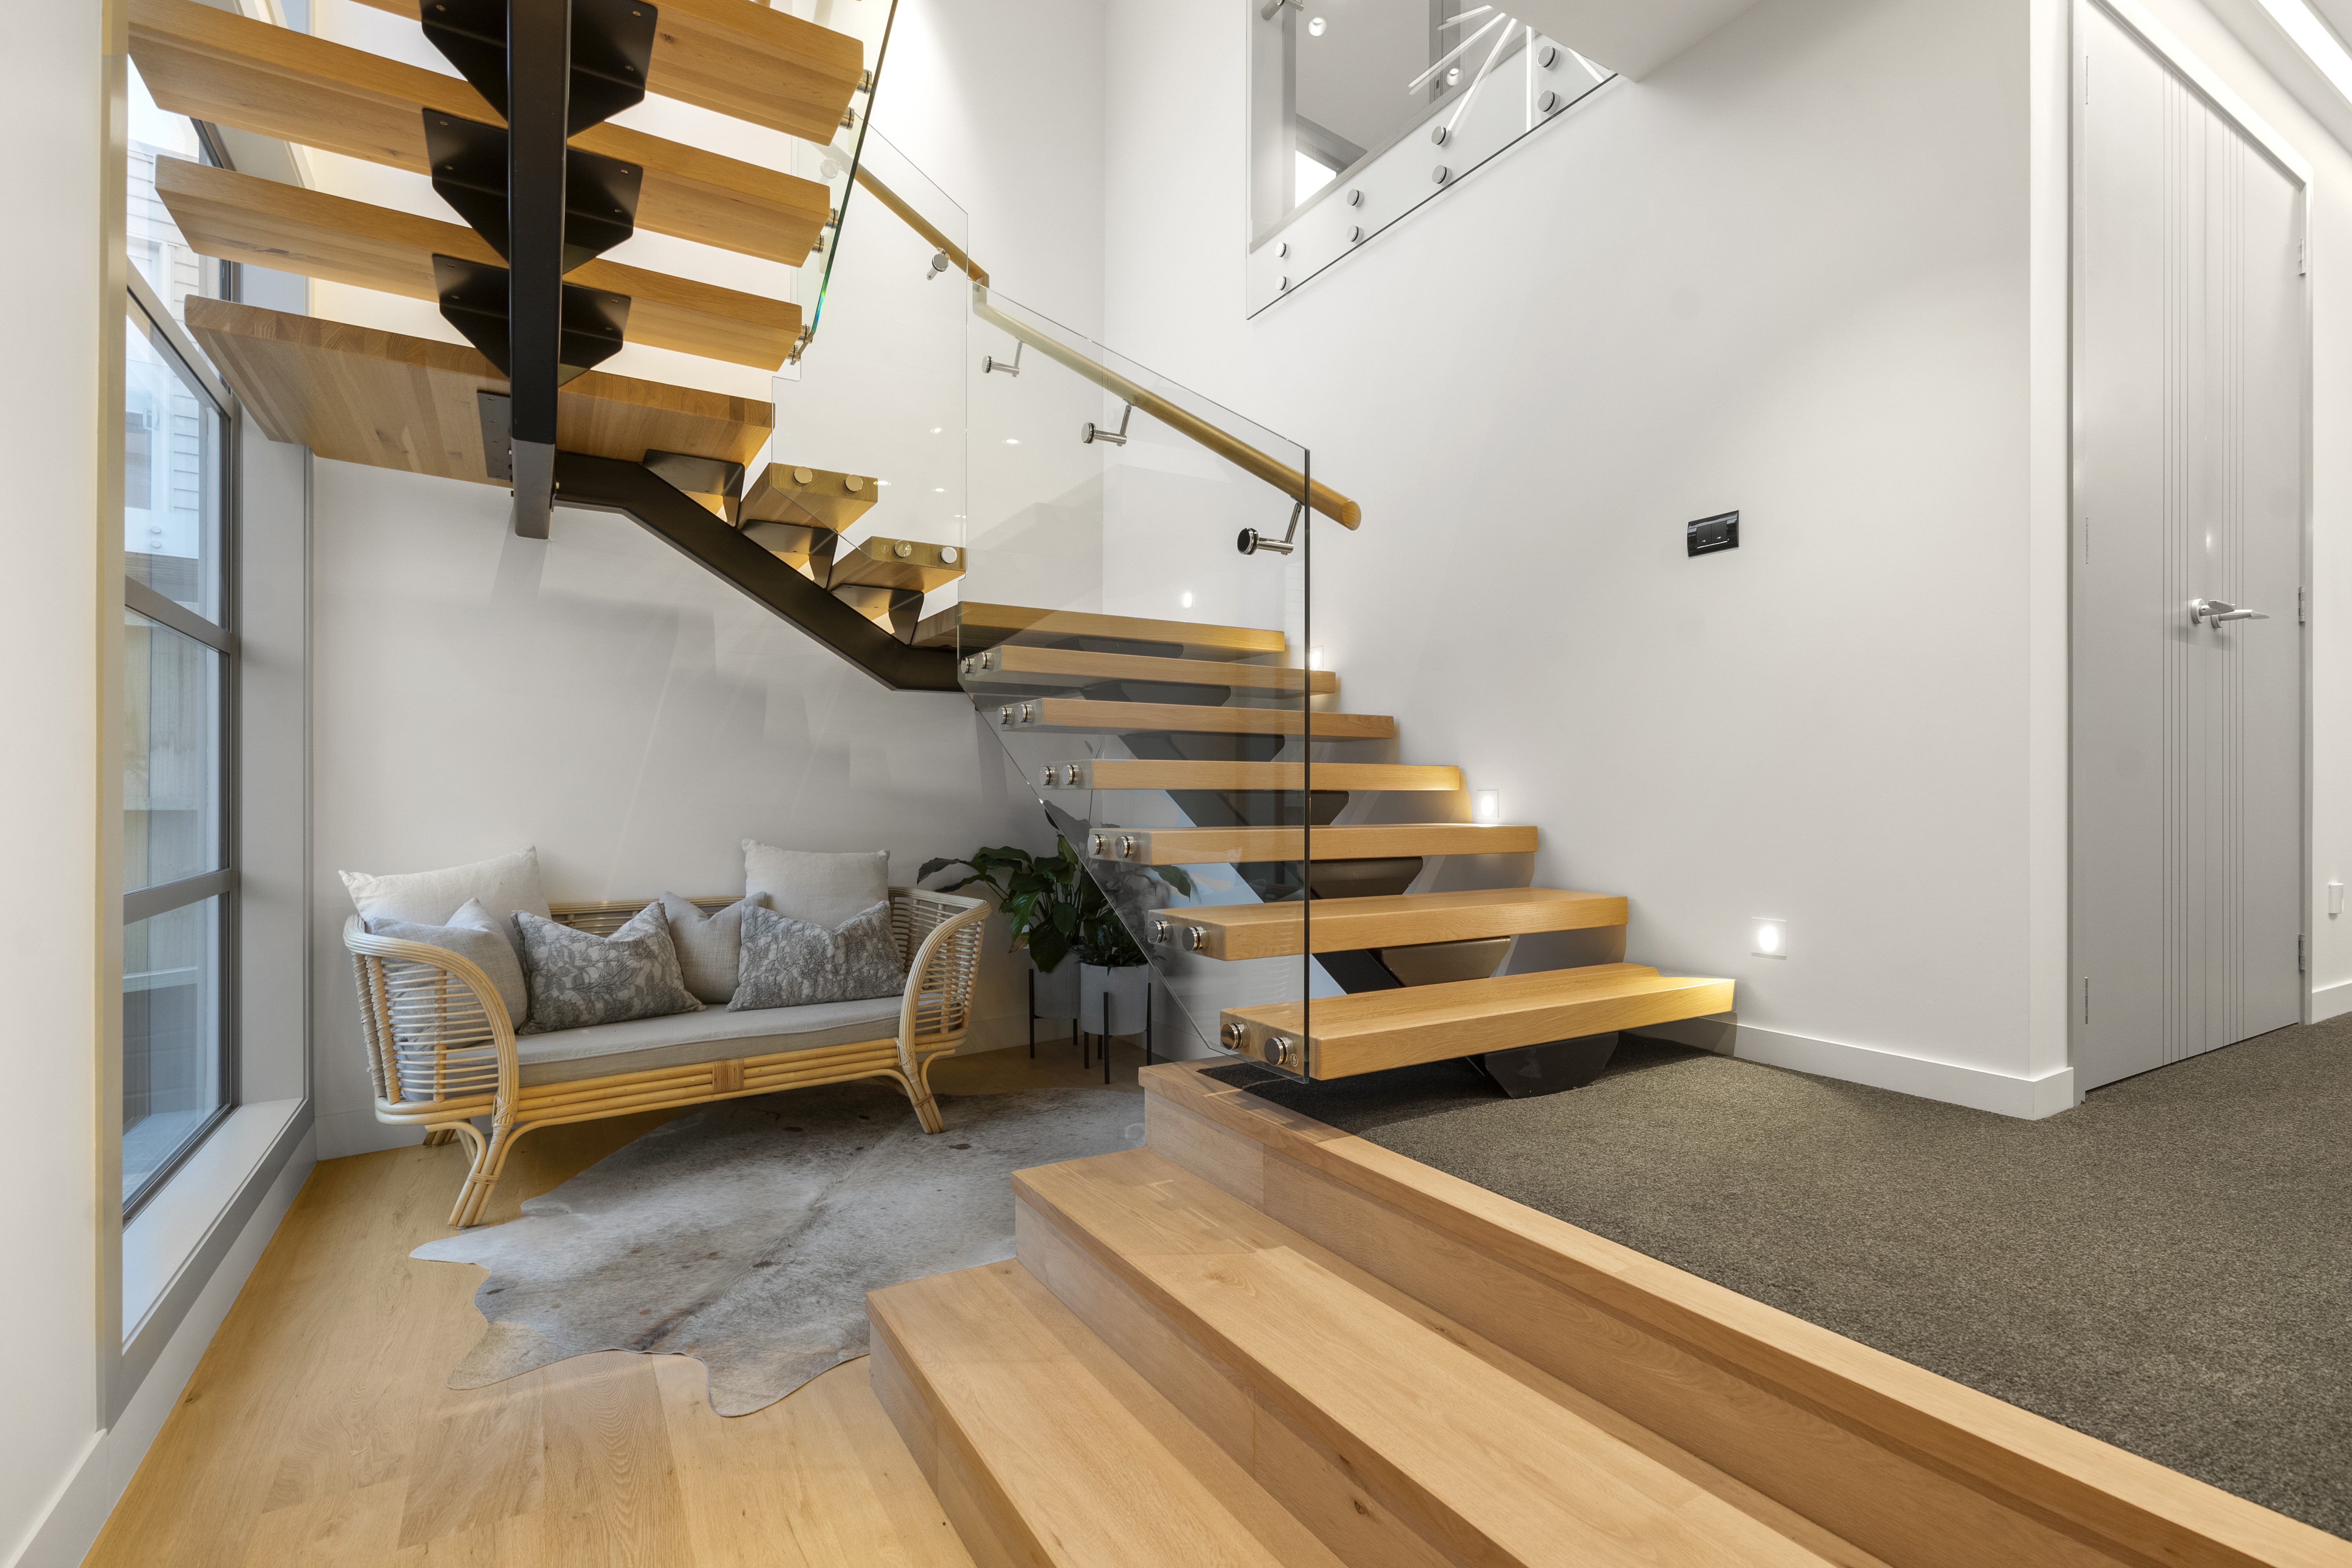 Staircase Design Ideas Gallery | Ackworth House